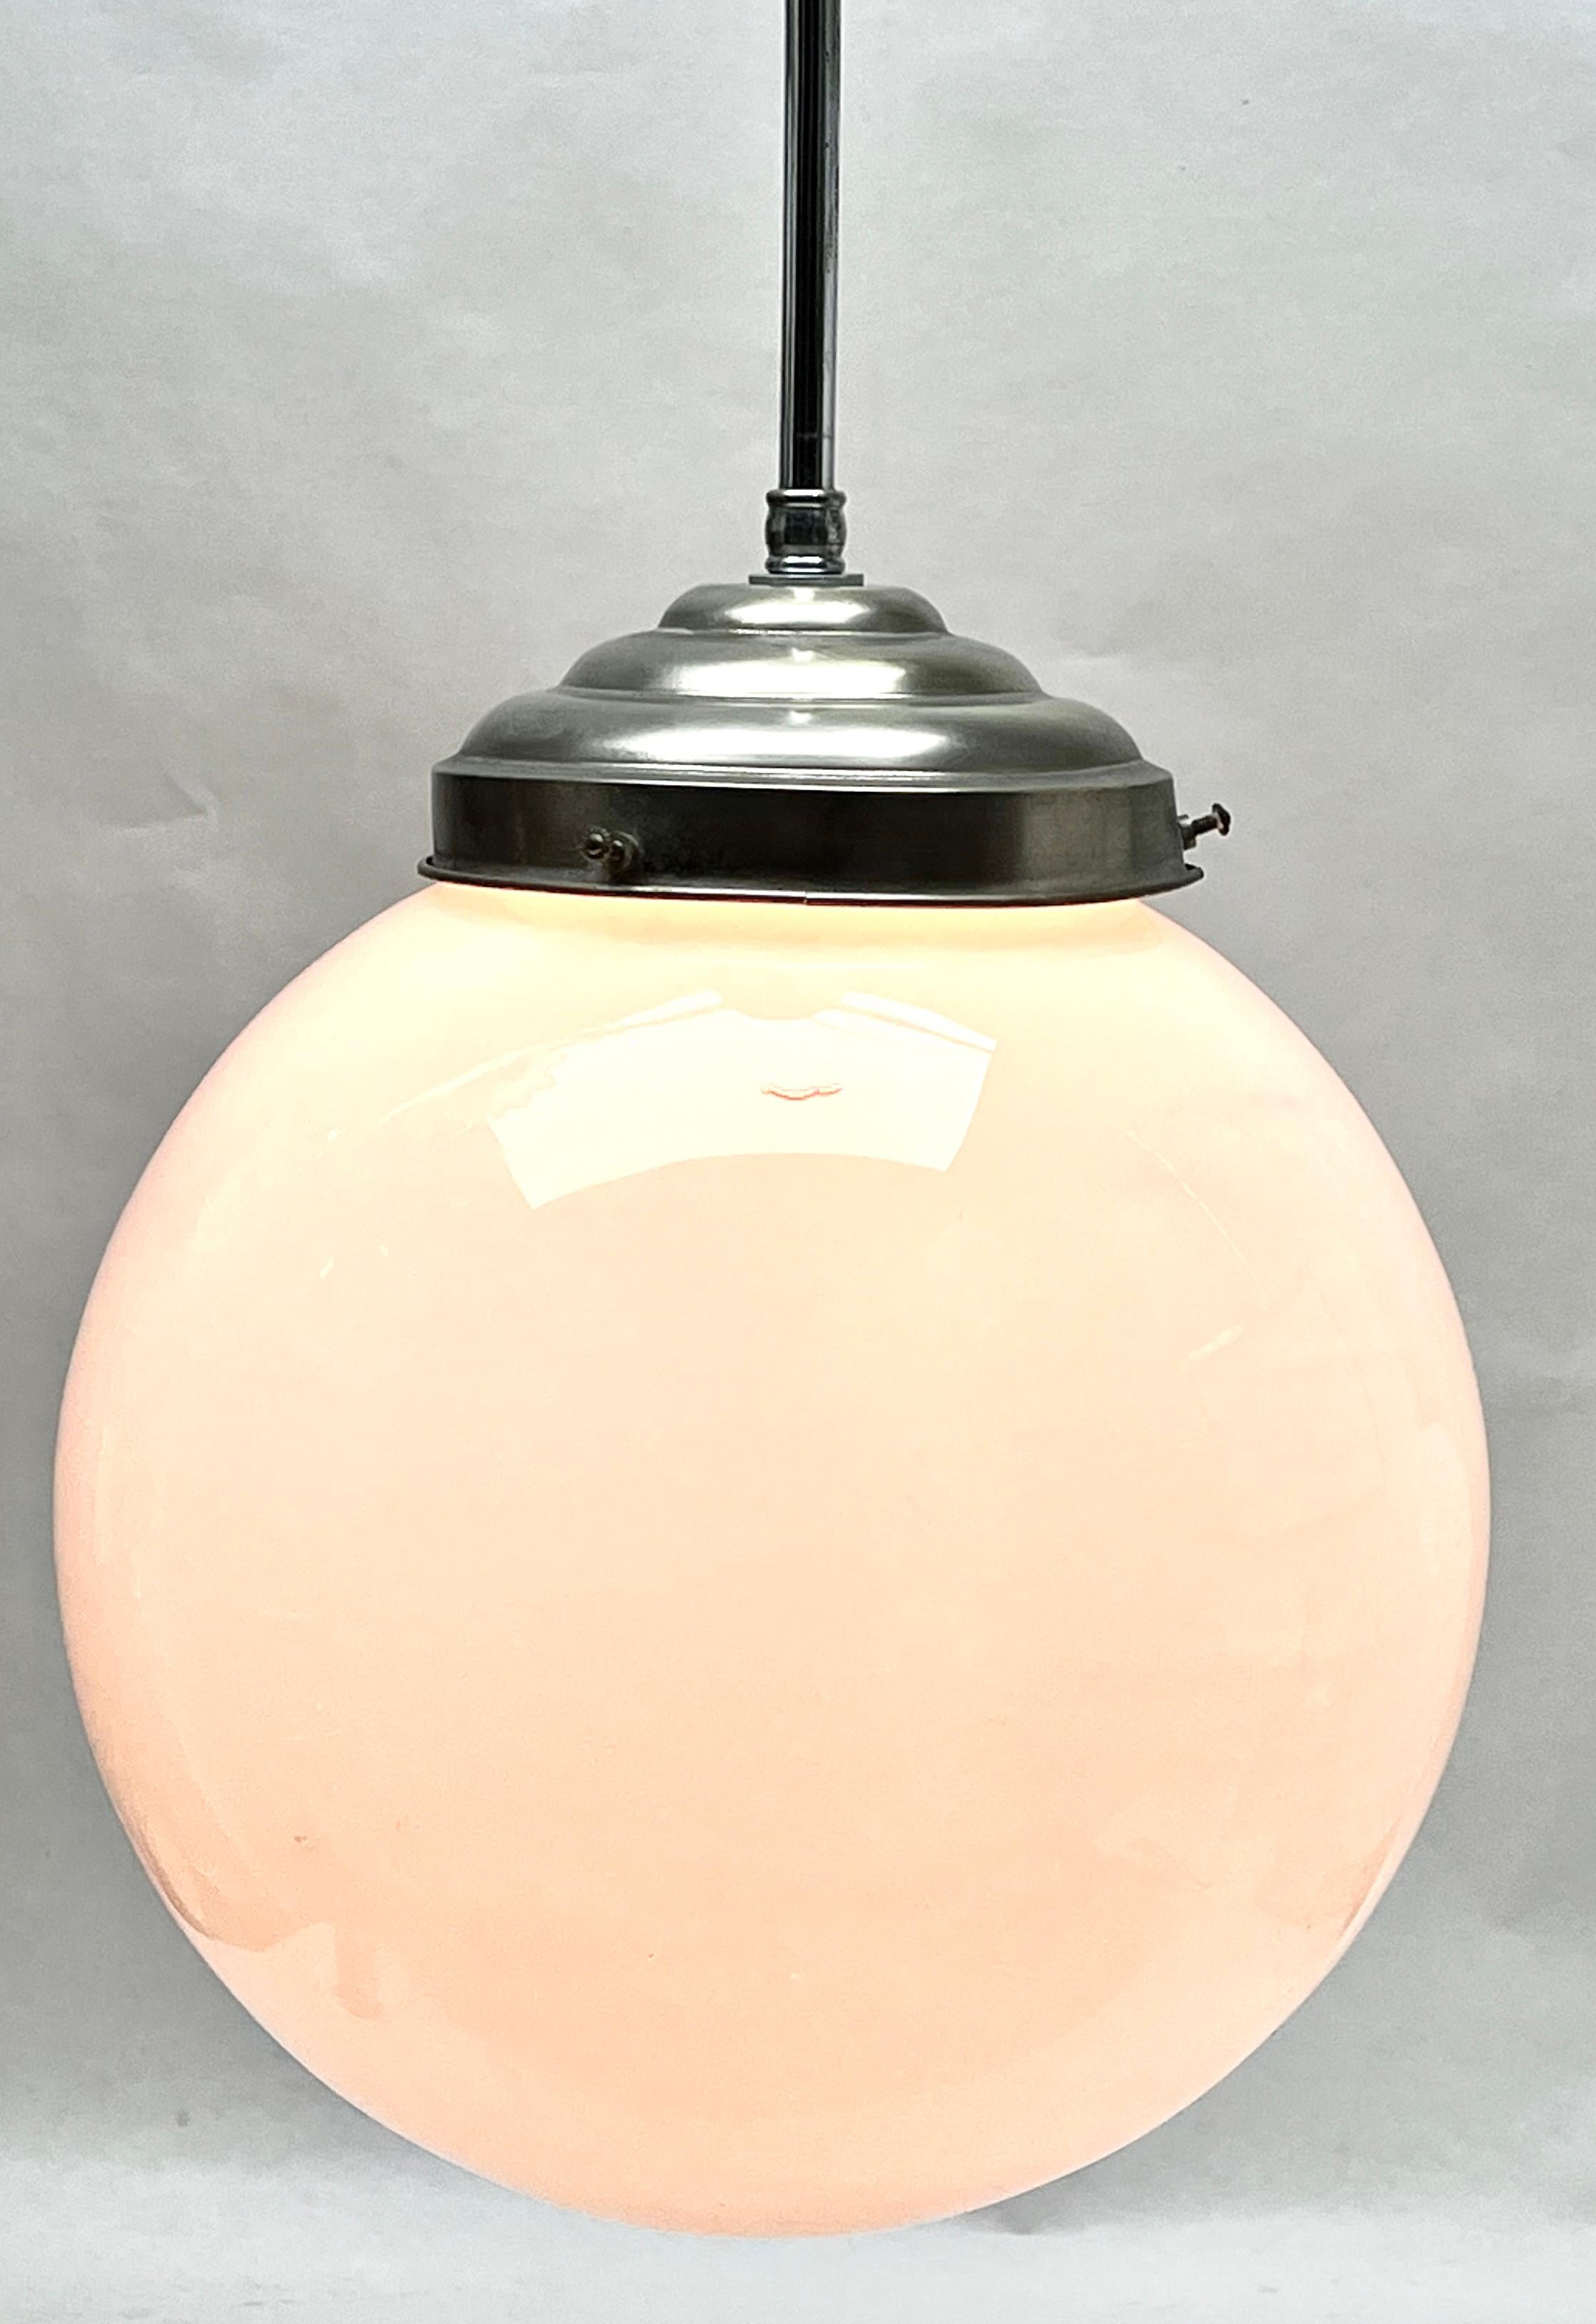 From the range by the Phillips Company, this center-light on a central chromed stem. The lamp has a fitting on a chromed plate and holds a round globular shade of opaline glass.

In good condition and in full working order with standard original